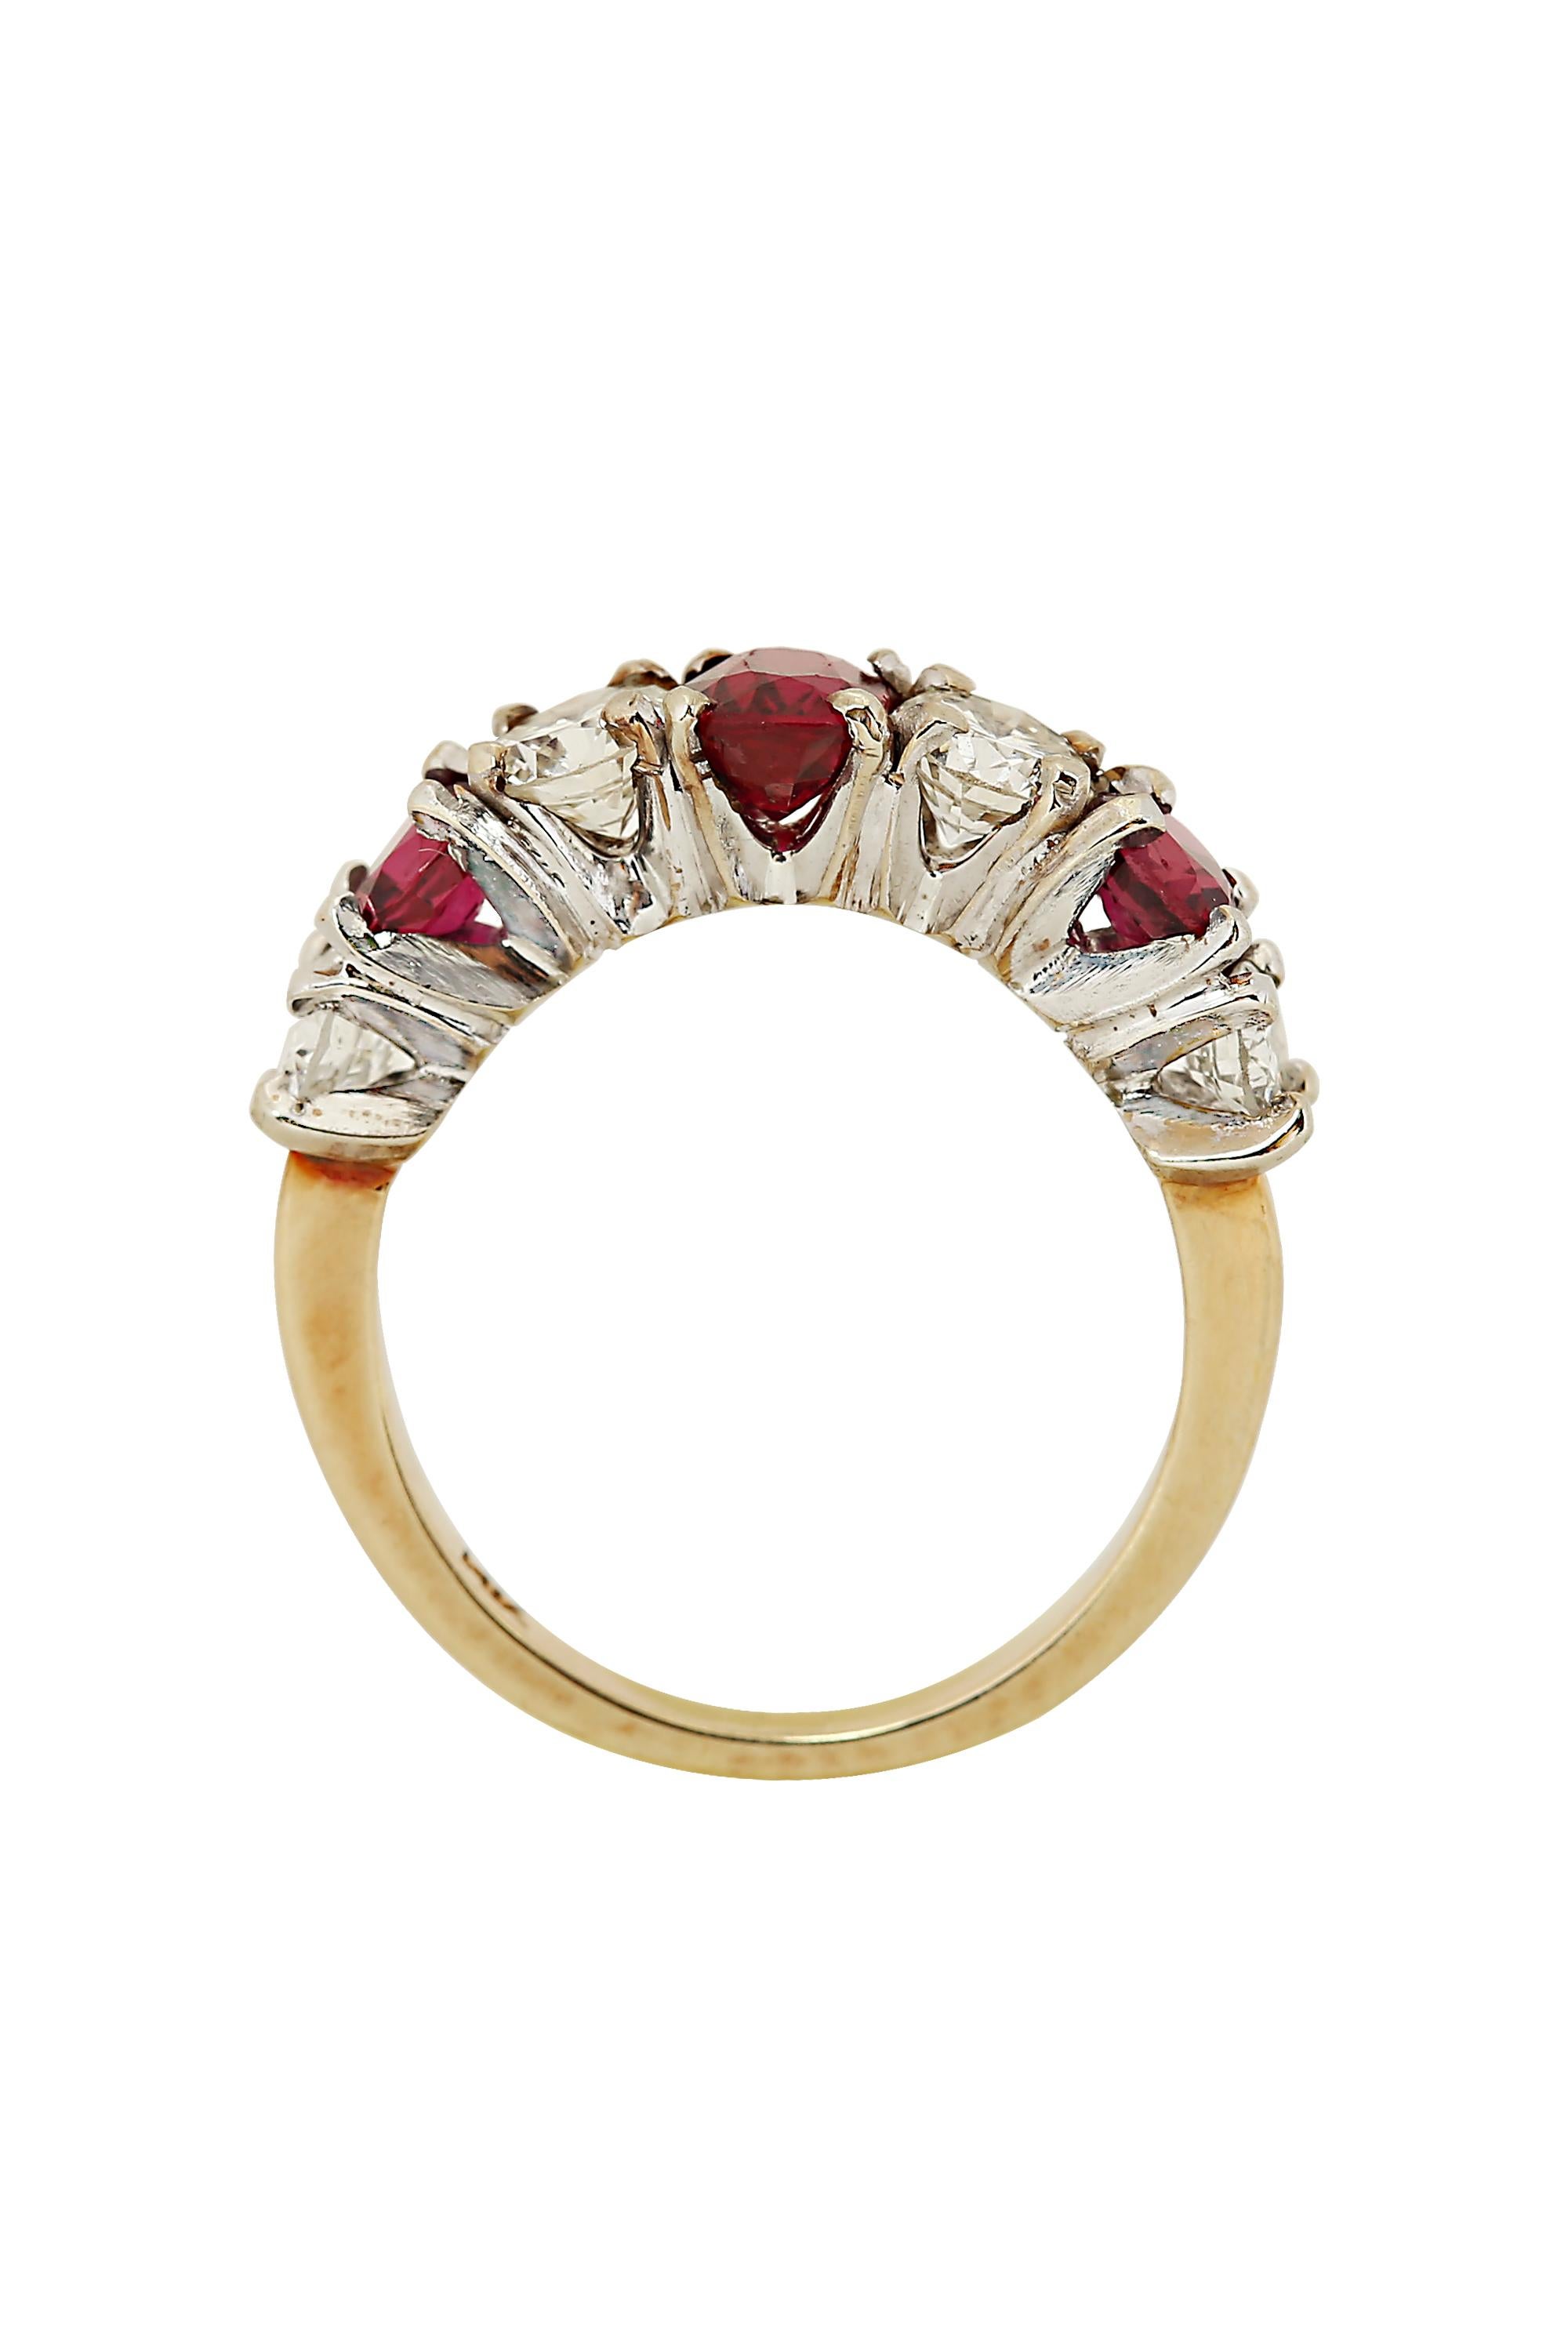 A classic study in red and white, this refined and stately ring features a radiant oval ruby center flanked on either side by alternating round diamonds and rubies. Mounted in 14 karat white and yellow gold. The ring is set with three rubies